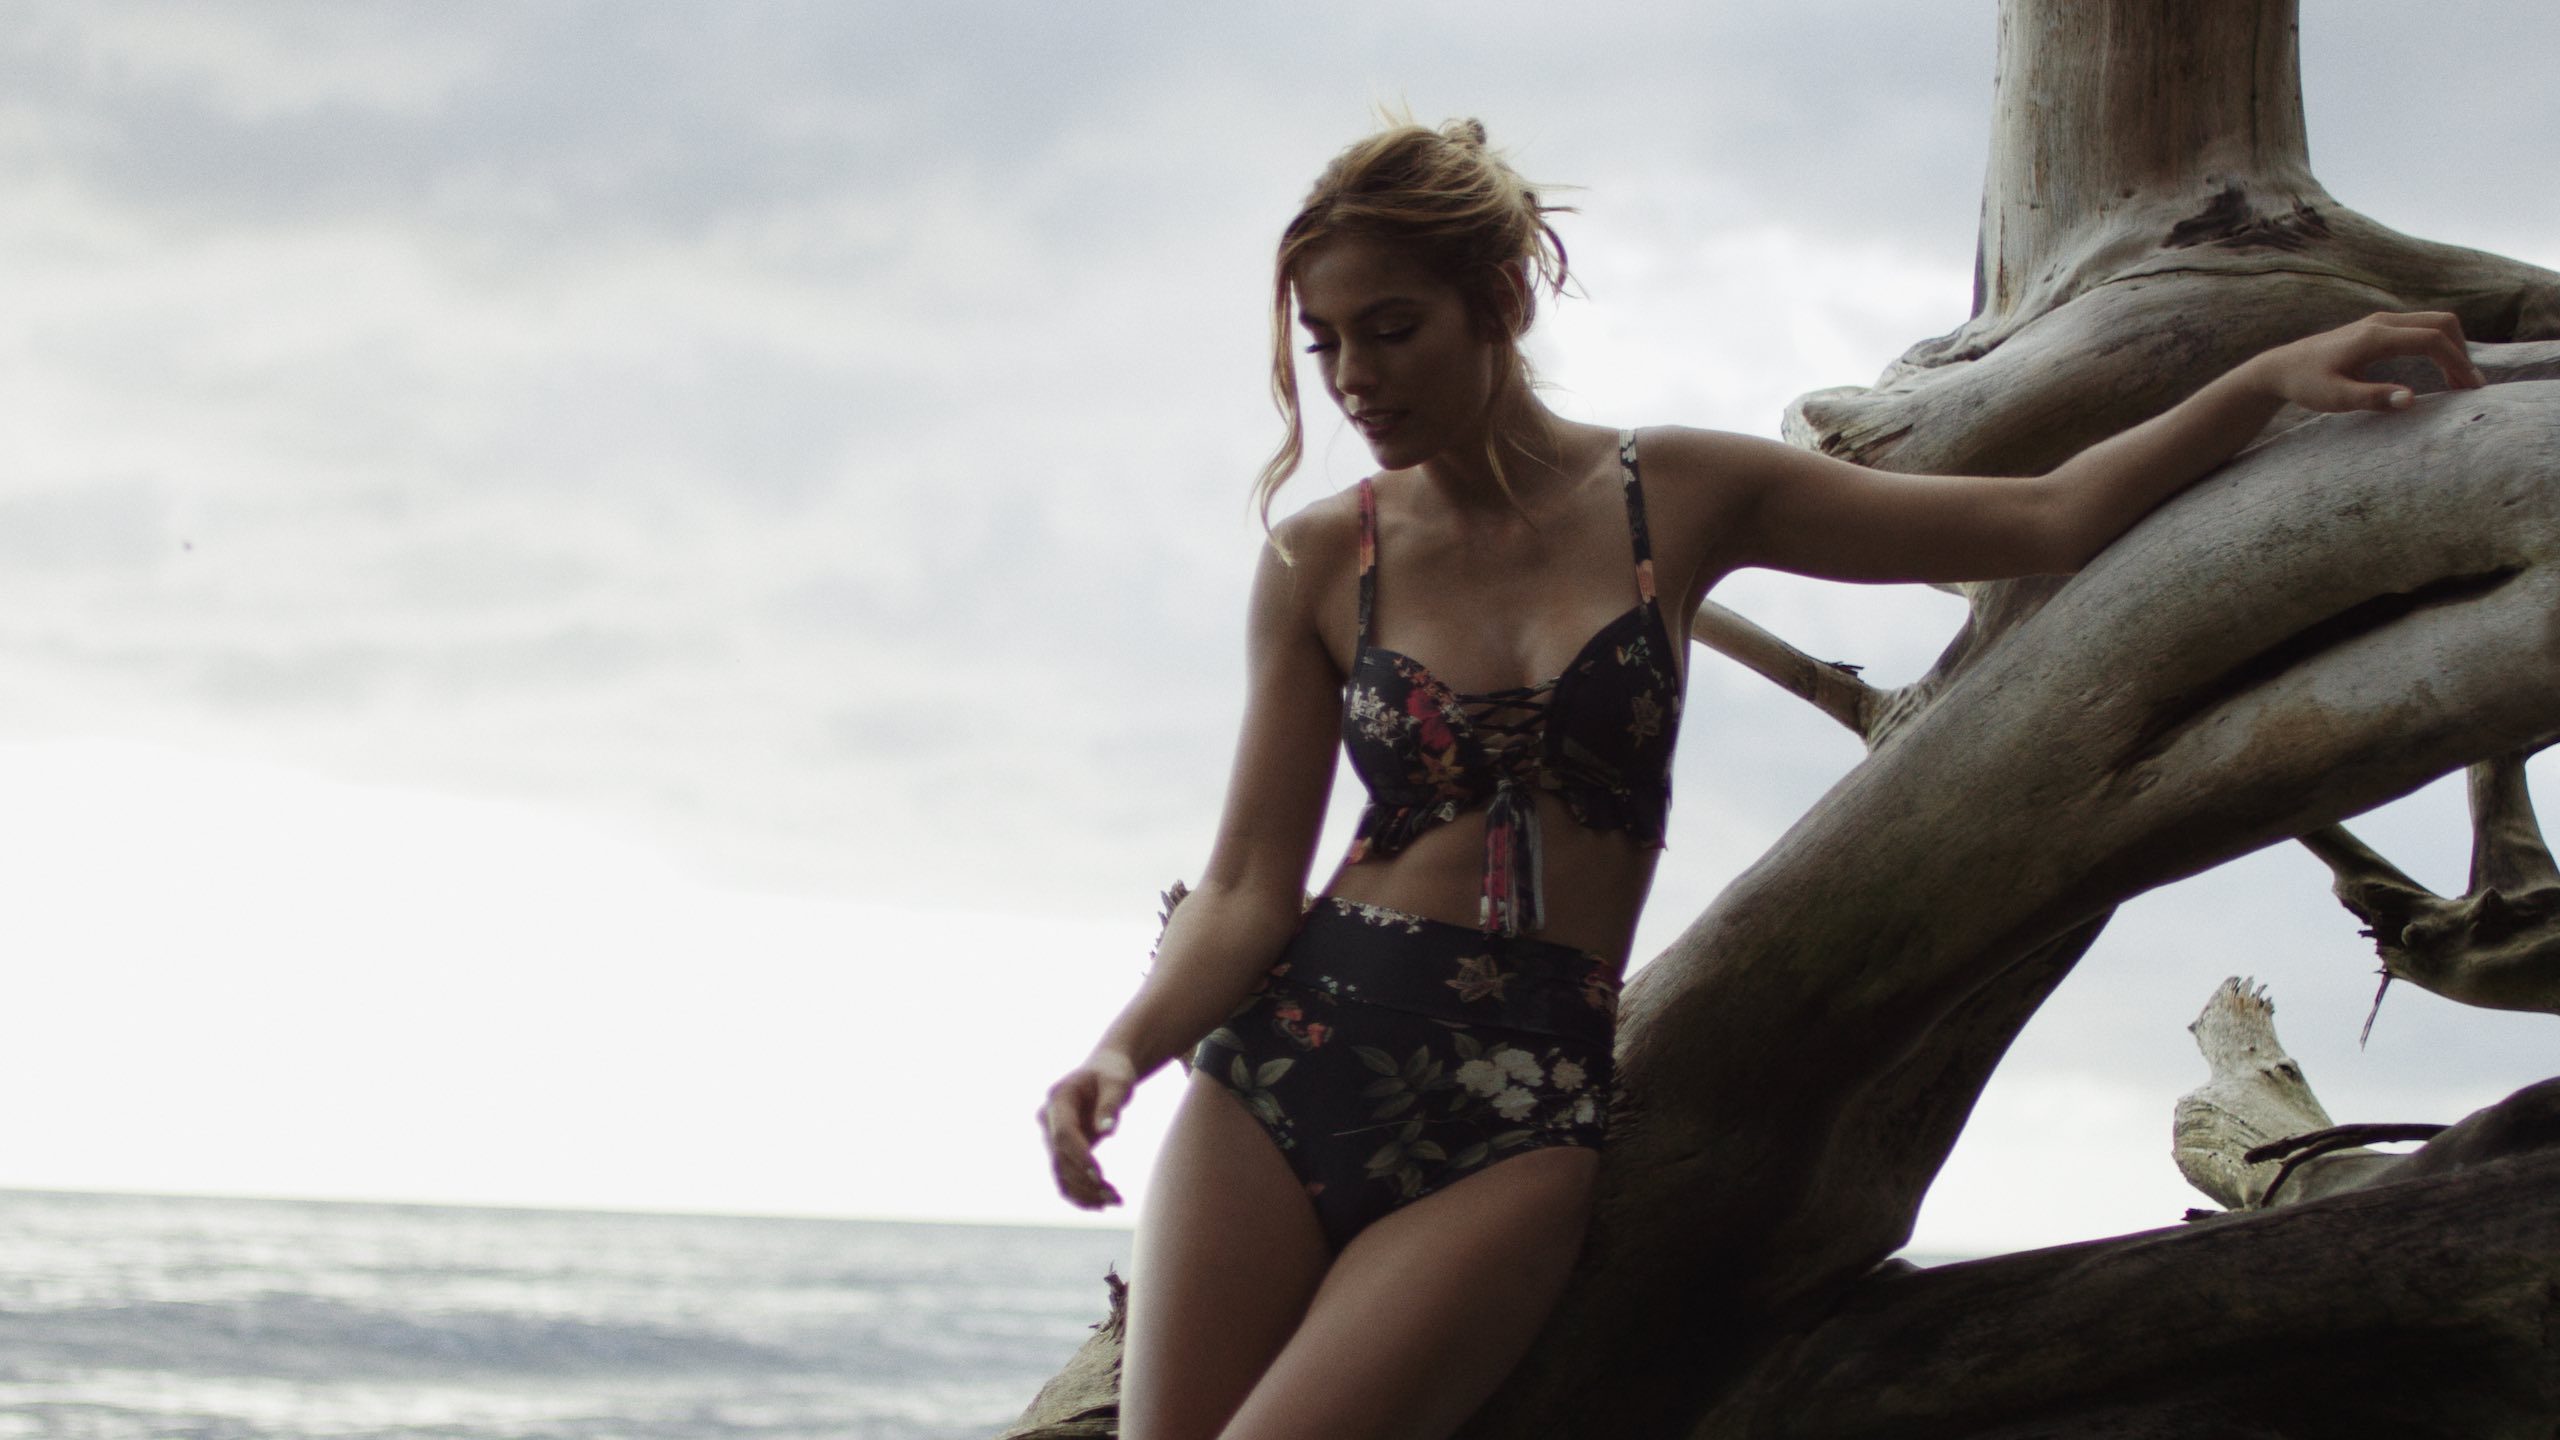 Puerto Rico with Montce Swim, The Dailies Season 2 Episode 1 with closeup of model with long blond hair posing wearing dark flowery bathing suit leaning on a dead tree on a beach